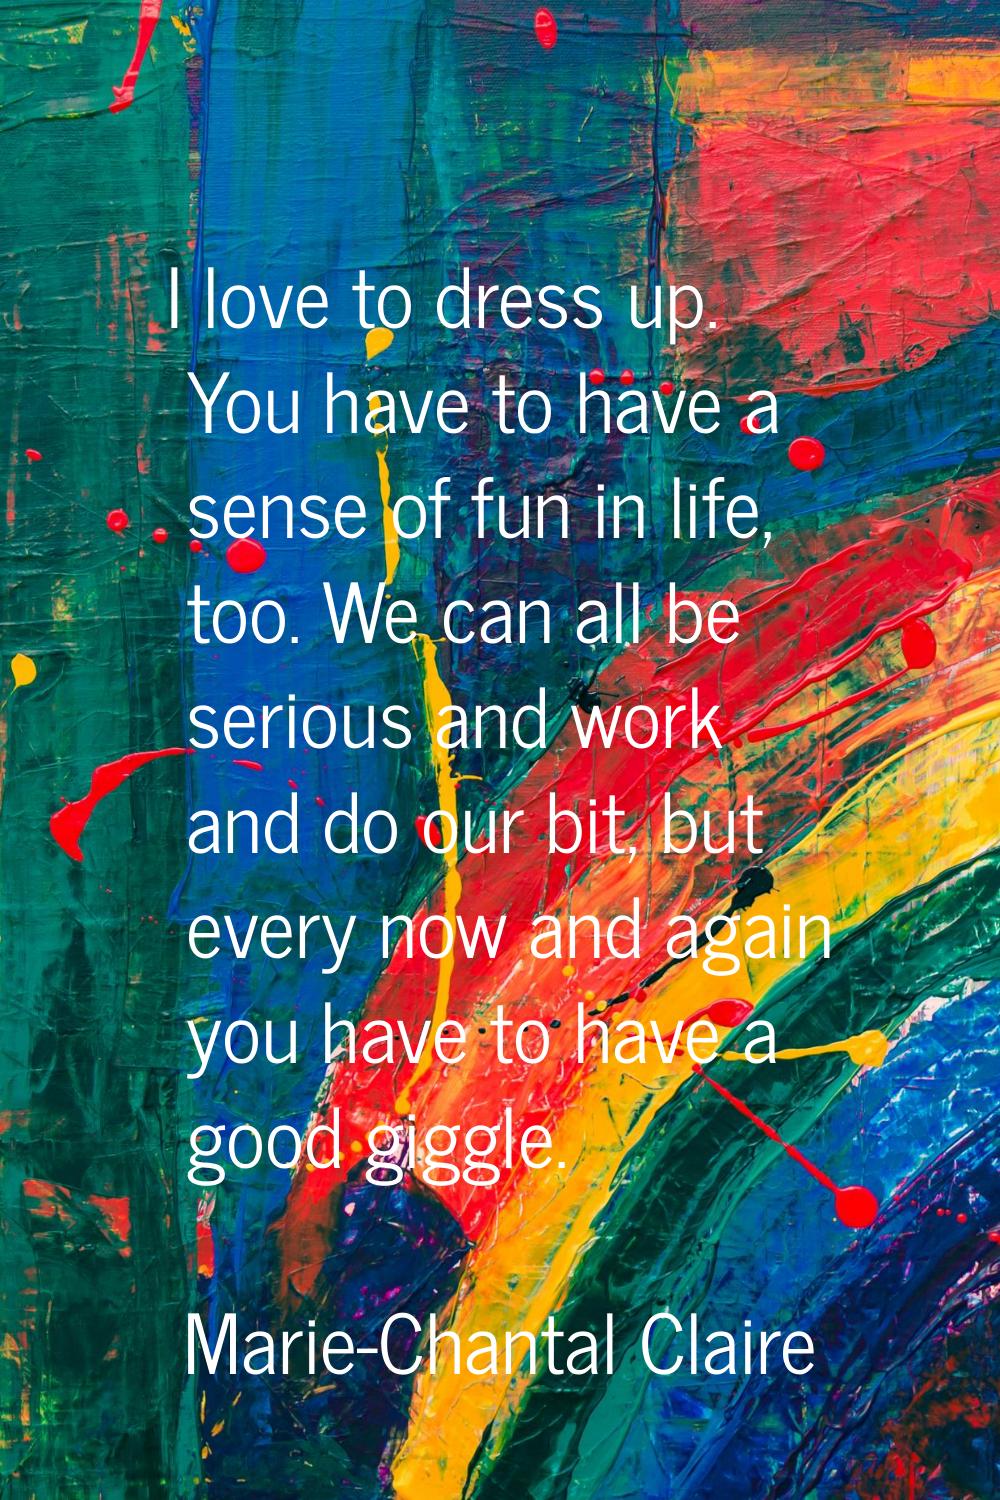 I love to dress up. You have to have a sense of fun in life, too. We can all be serious and work an